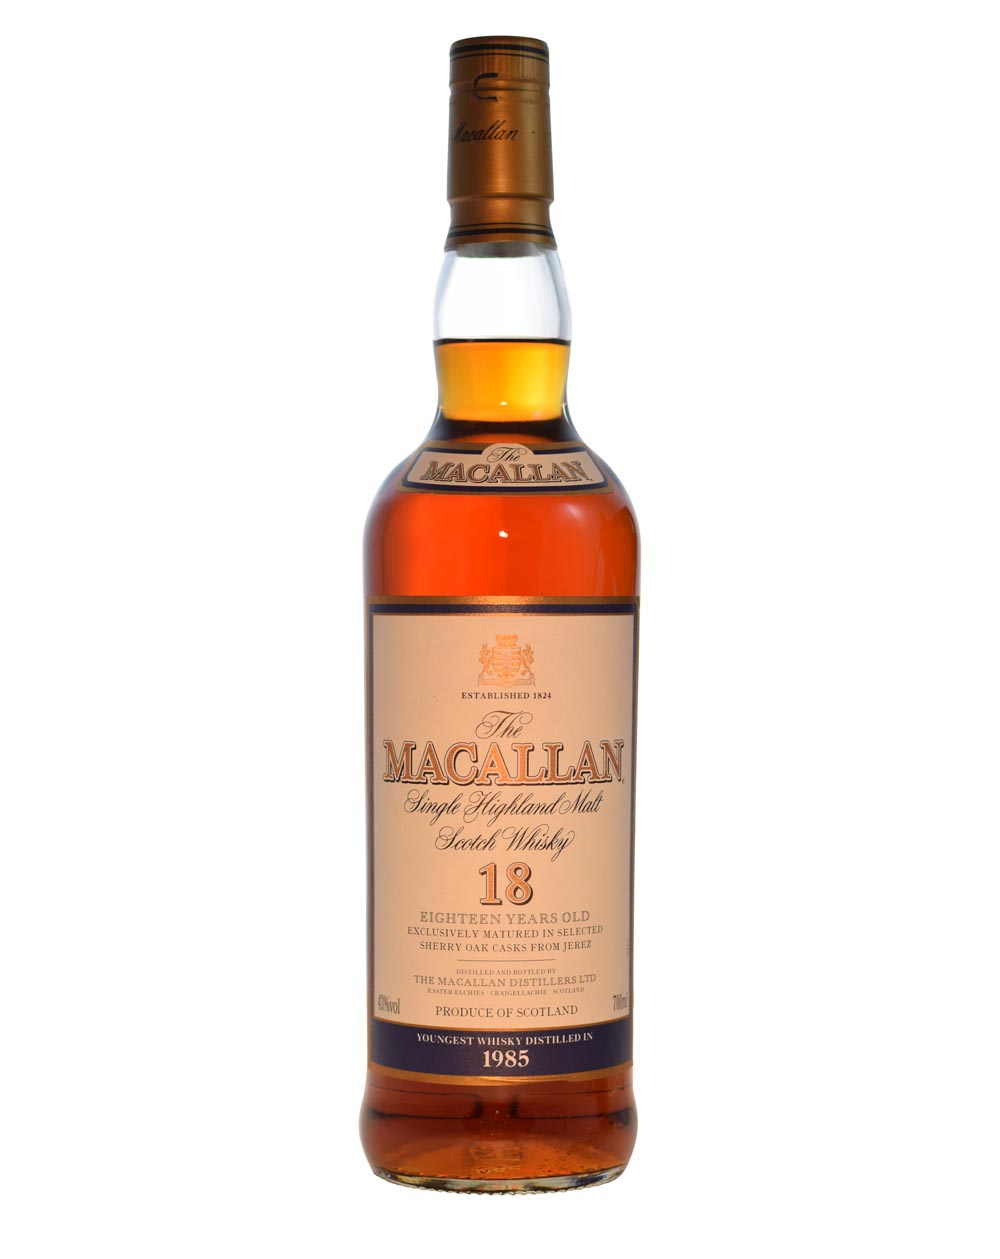 The Macallan 18 Years Old (Distilled in 1985) Musthave Malts MHM